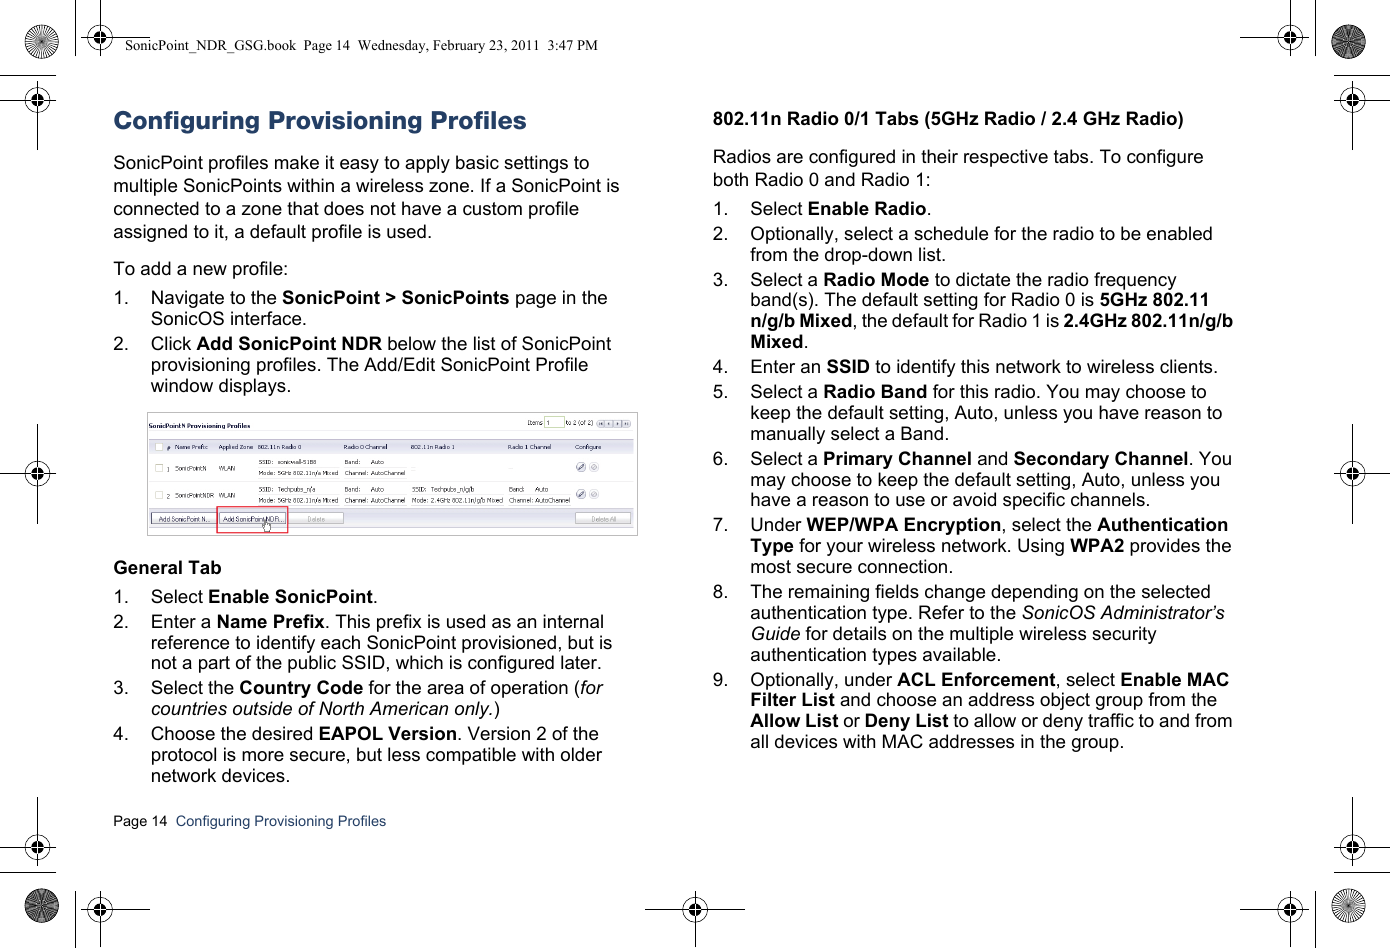 Page 14  Configuring Provisioning Profiles  Configuring Provisioning ProfilesSonicPoint profiles make it easy to apply basic settings to multiple SonicPoints within a wireless zone. If a SonicPoint is connected to a zone that does not have a custom profile assigned to it, a default profile is used. To add a new profile:1. Navigate to the SonicPoint &gt; SonicPoints page in the SonicOS interface.2. Click Add SonicPoint NDR below the list of SonicPoint provisioning profiles. The Add/Edit SonicPoint Profile window displays.General Tab1. Select Enable SonicPoint.2. Enter a Name Prefix. This prefix is used as an internal reference to identify each SonicPoint provisioned, but is not a part of the public SSID, which is configured later.3. Select the Country Code for the area of operation (for countries outside of North American only.)4. Choose the desired EAPOL Version. Version 2 of the protocol is more secure, but less compatible with older network devices.802.11n Radio 0/1 Tabs (5GHz Radio / 2.4 GHz Radio)Radios are configured in their respective tabs. To configure both Radio 0 and Radio 1:1. Select Enable Radio. 2. Optionally, select a schedule for the radio to be enabled from the drop-down list. 3. Select a Radio Mode to dictate the radio frequency band(s). The default setting for Radio 0 is 5GHz 802.11n/g/b Mixed, the default for Radio 1 is 2.4GHz 802.11n/g/b Mixed.4. Enter an SSID to identify this network to wireless clients.5. Select a Radio Band for this radio. You may choose to keep the default setting, Auto, unless you have reason to manually select a Band.6. Select a Primary Channel and Secondary Channel. You may choose to keep the default setting, Auto, unless you have a reason to use or avoid specific channels.7. Under WEP/WPA Encryption, select the Authentication Type for your wireless network. Using WPA2 provides the most secure connection.8. The remaining fields change depending on the selected authentication type. Refer to the SonicOS Administrator’s Guide for details on the multiple wireless security authentication types available.9. Optionally, under ACL Enforcement, select Enable MAC Filter List and choose an address object group from the Allow List or Deny List to allow or deny traffic to and from all devices with MAC addresses in the group.SonicPoint_NDR_GSG.book  Page 14  Wednesday, February 23, 2011  3:47 PM